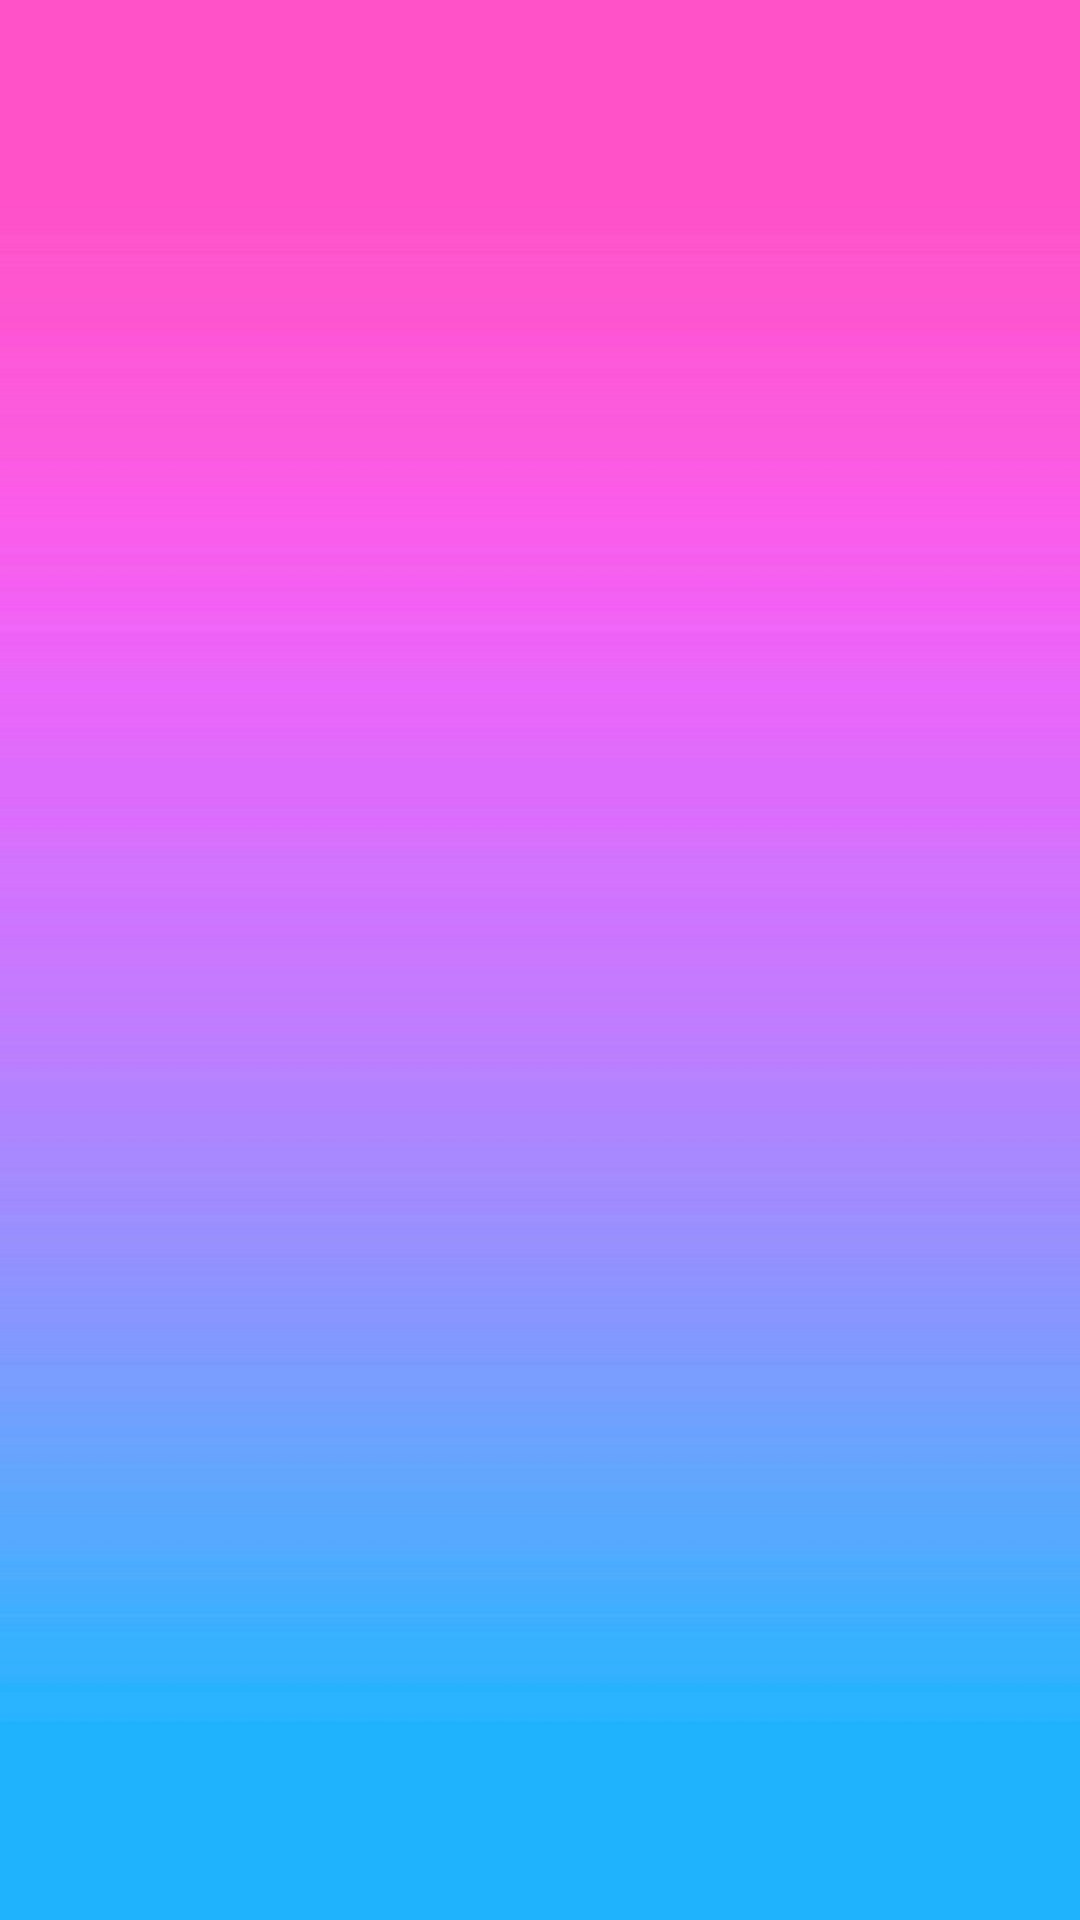 Gradient iPhone 6 Wallpaper HD with high-resolution 1080x1920 pixel. Download all Mobile Wallpapers and Use them as wallpapers for your iPhone, Tablet, iPad, Android and other mobile devices